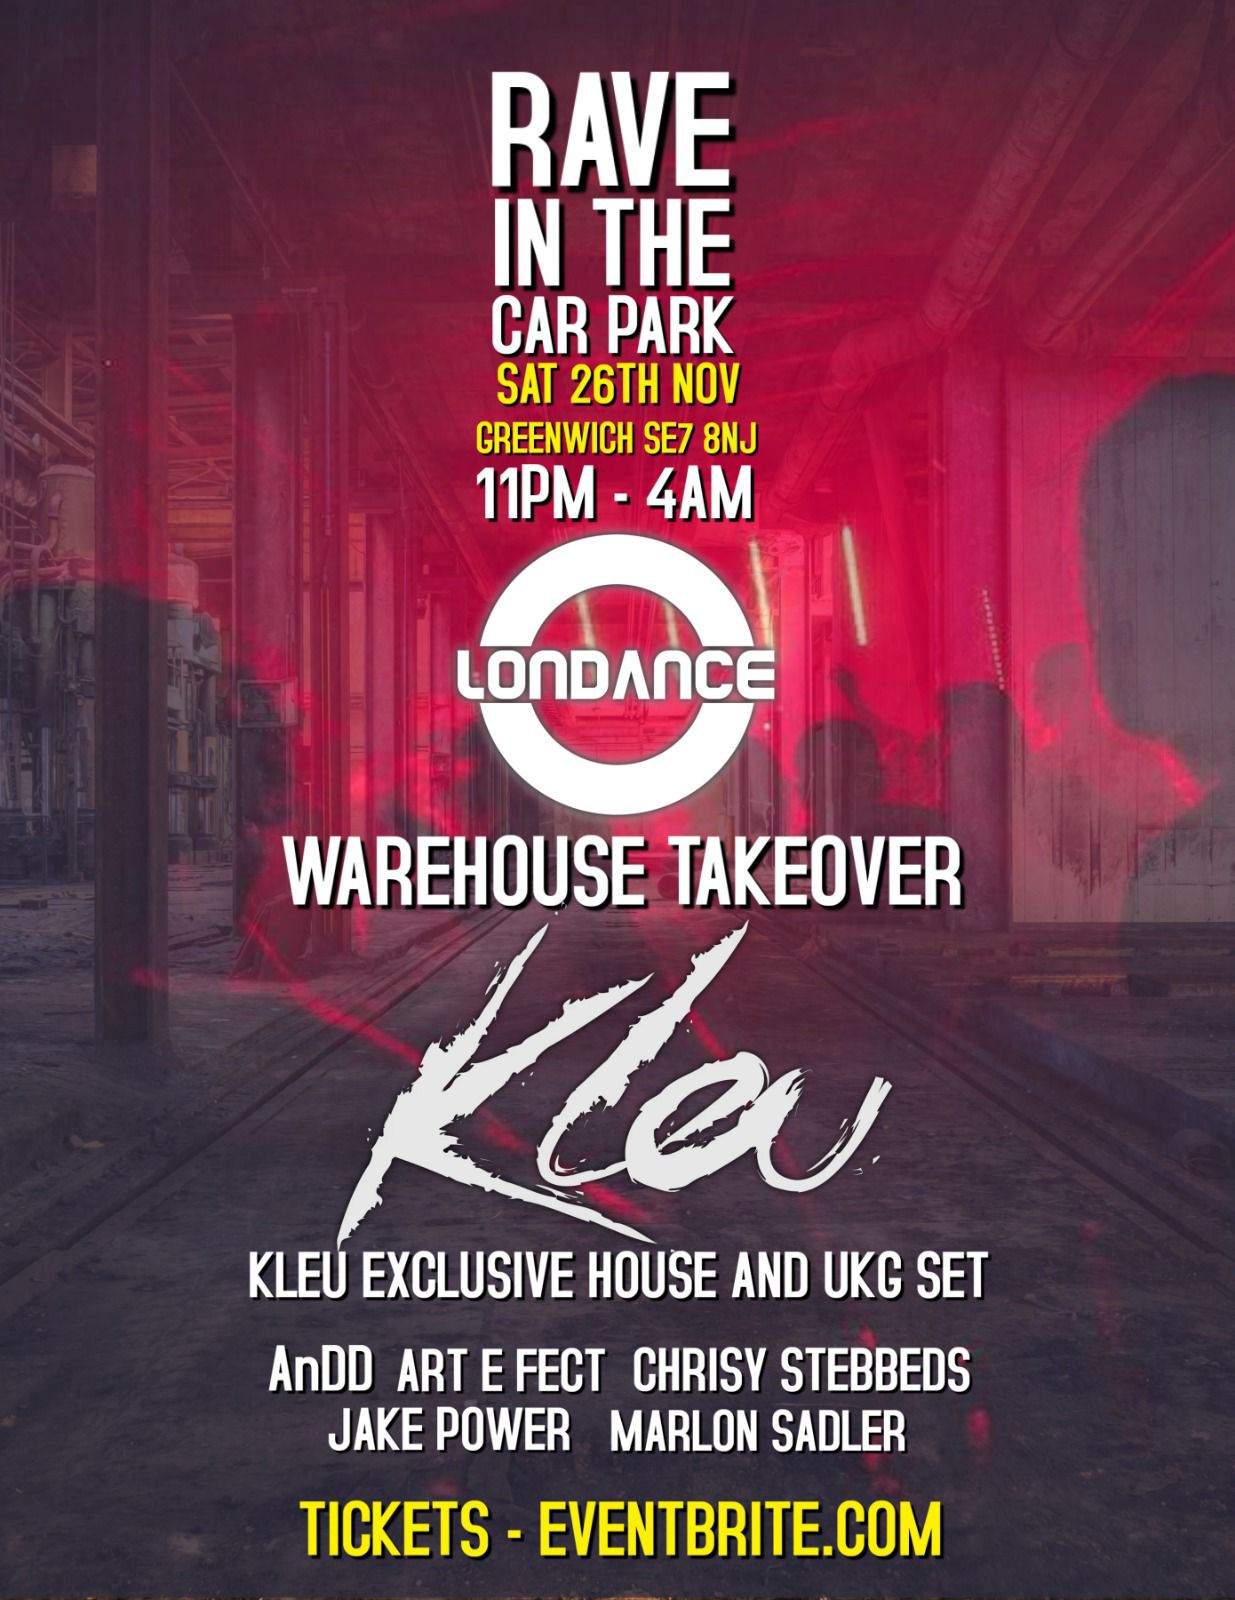 LONDANCE WAREHOUSE TAKEOVER at RAVE IN THE CAR PARK - フライヤー表